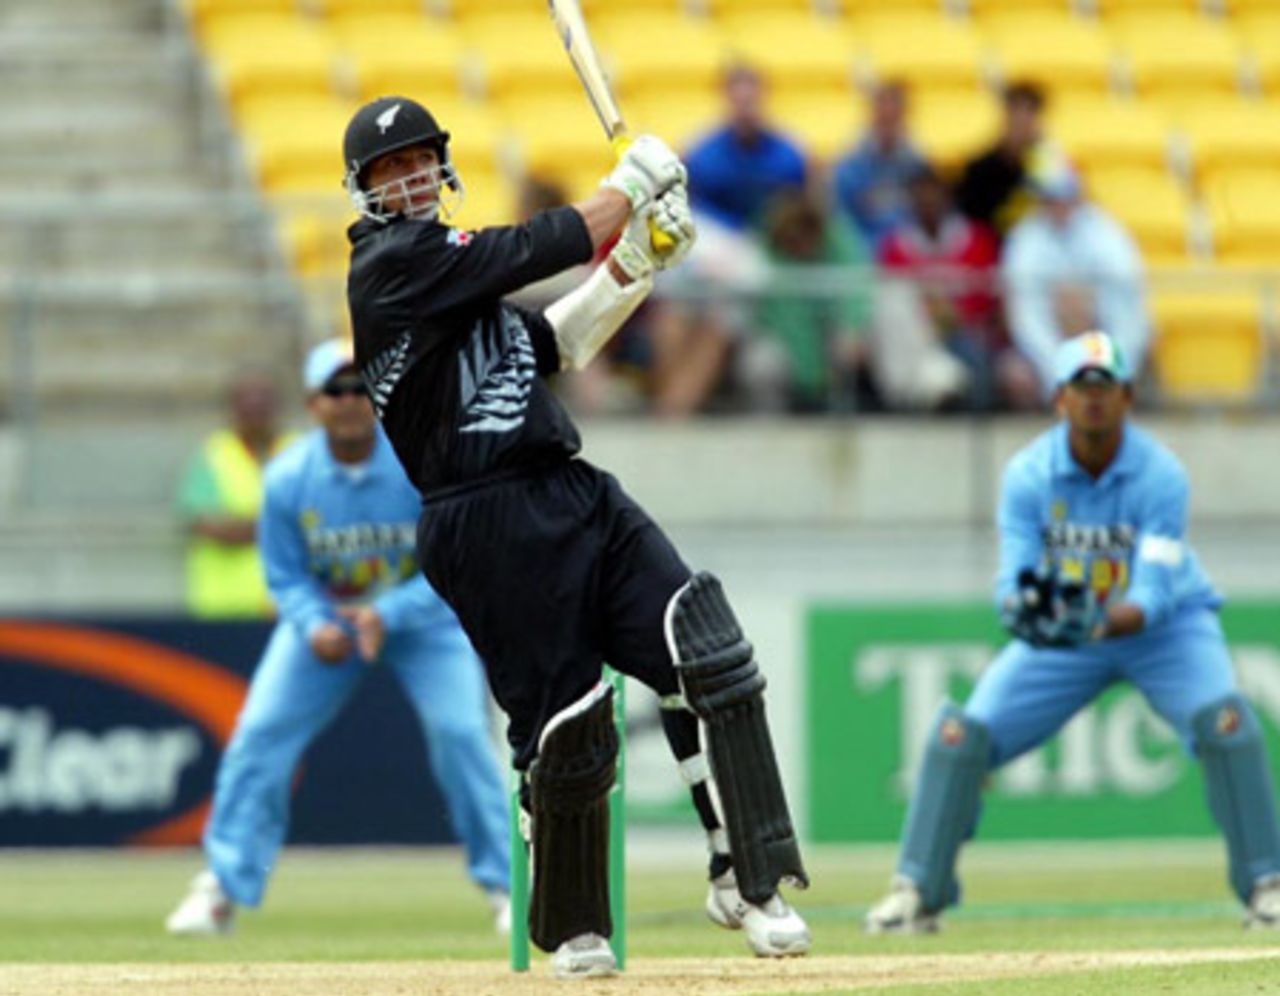 New Zealand batsman Andre Adams pulls a delivery through midwicket during his innings of 35. Indian slip fielder Virender Sehwag (left) and wicket-keeper Rahul Dravid look on in the background. 5th ODI: New Zealand v India at Westpac Stadium, Wellington, 8 January 2003.